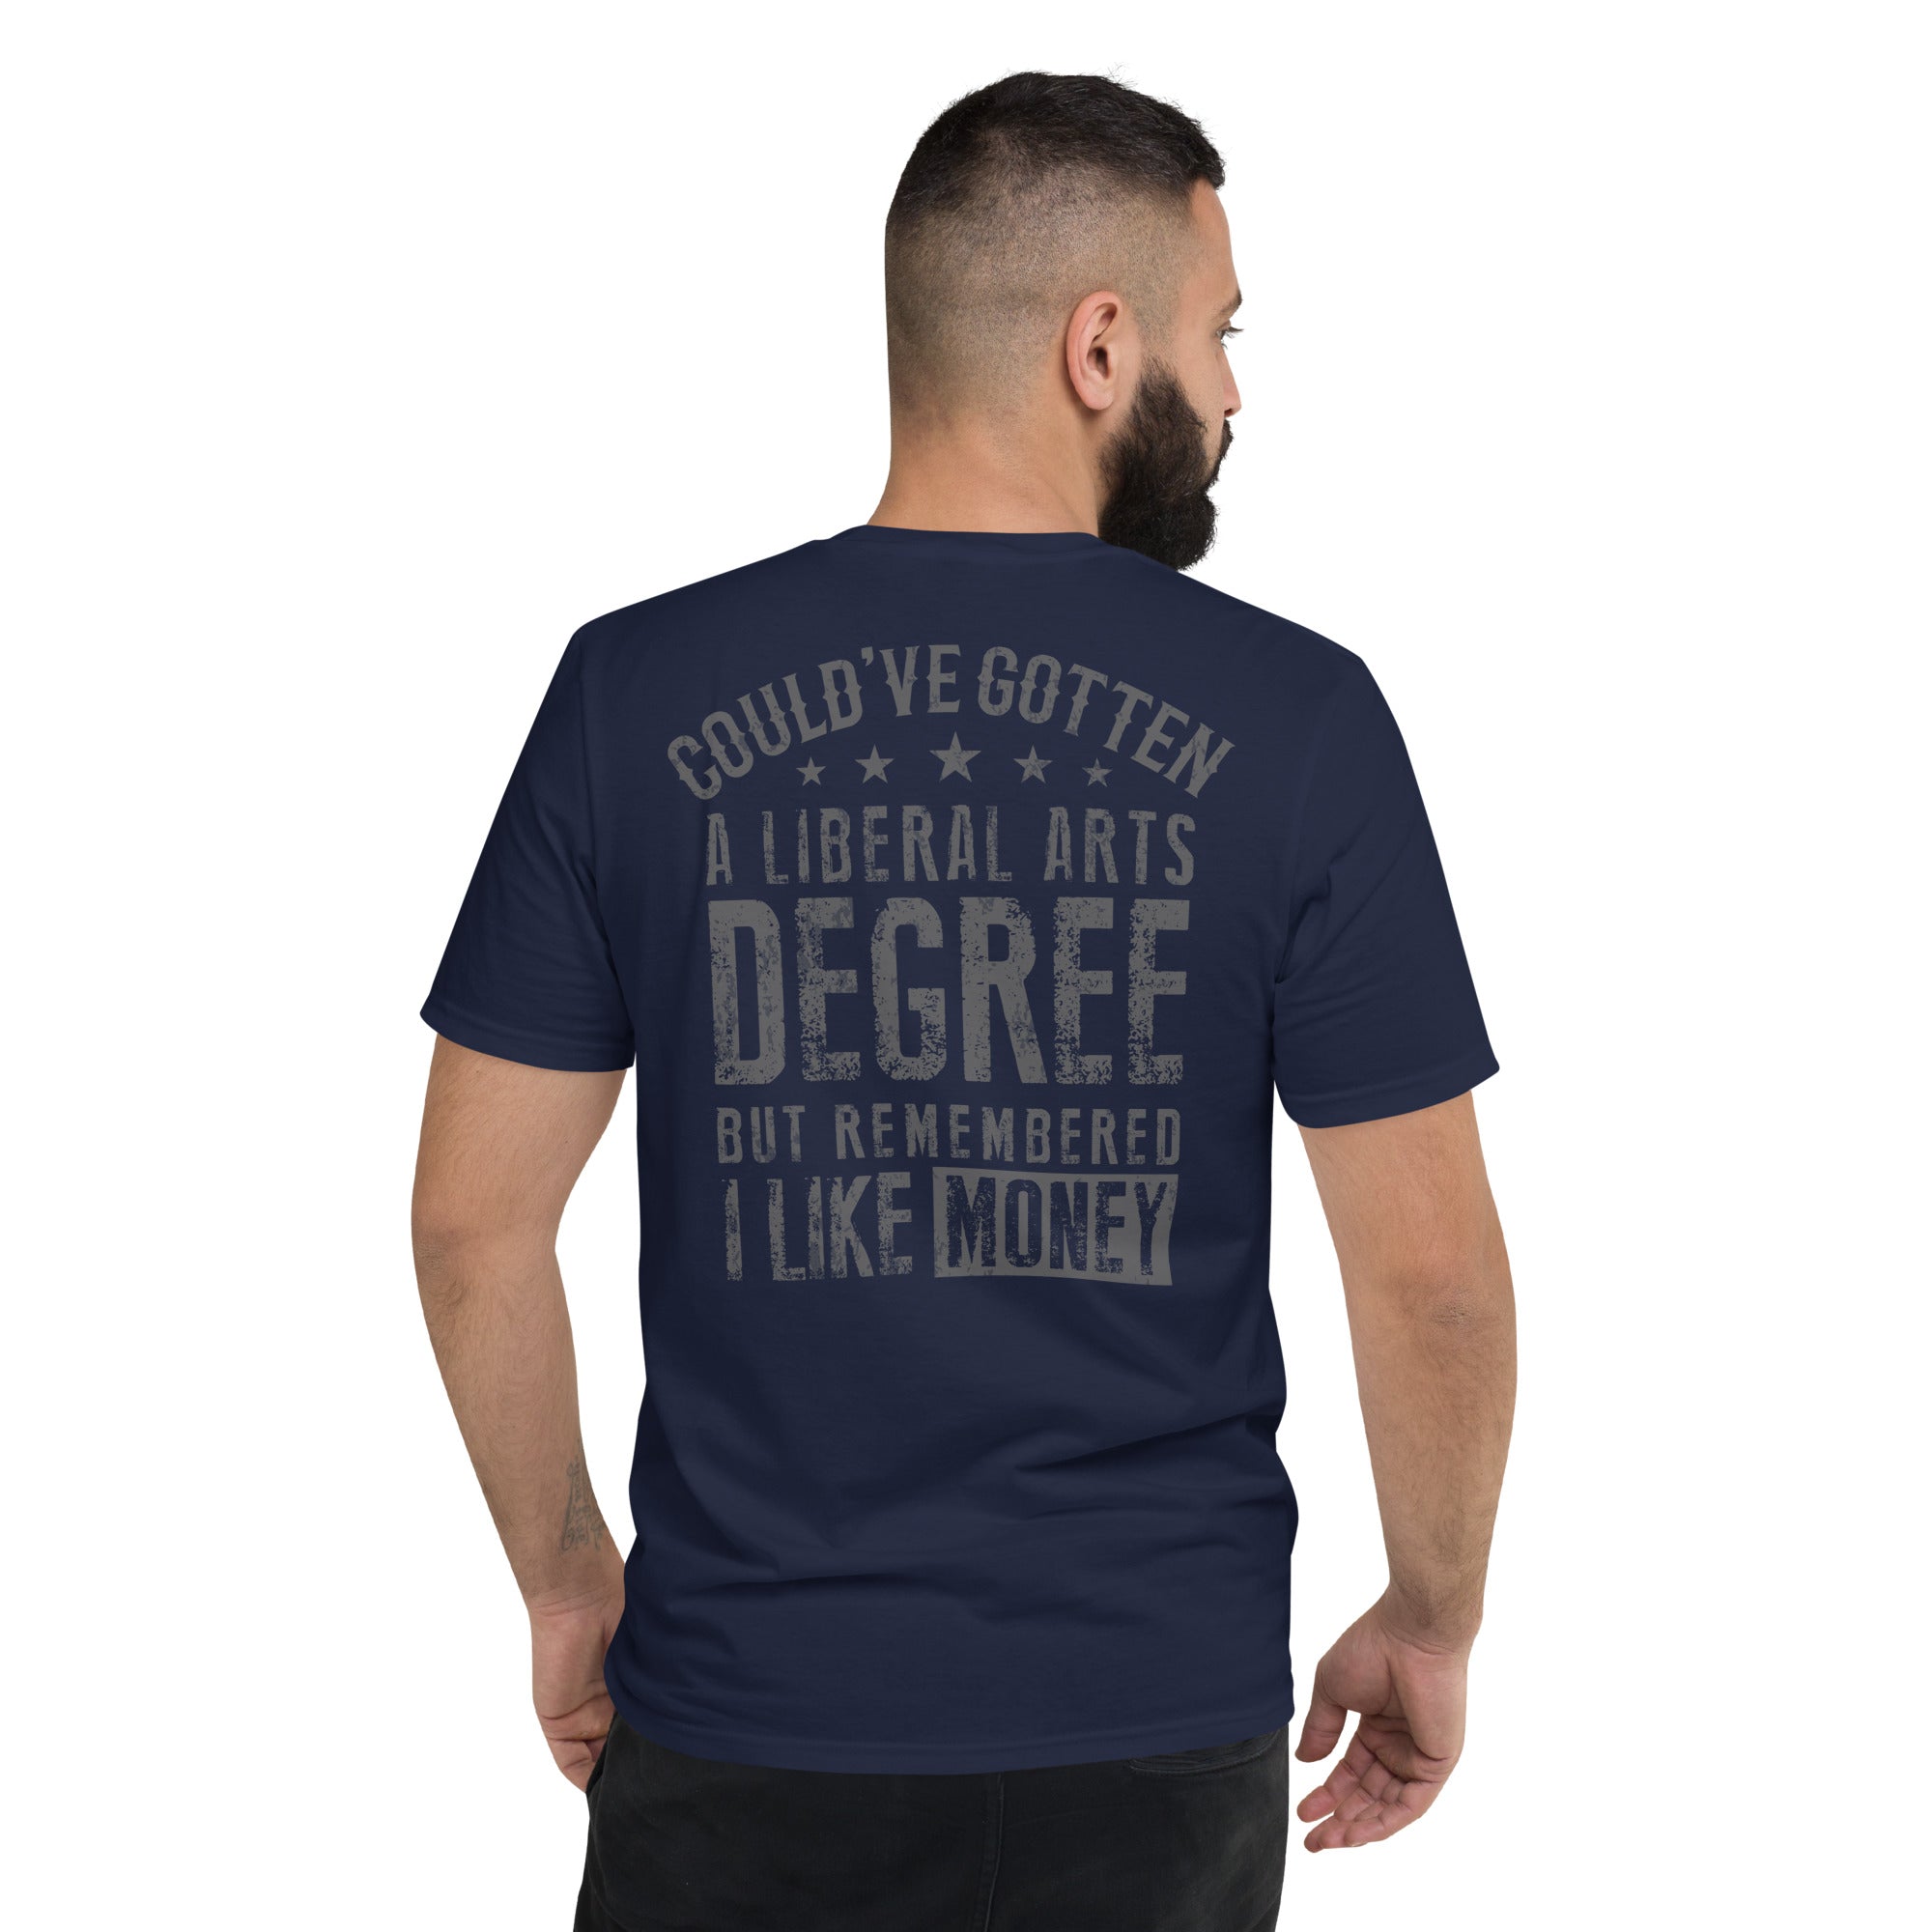 Could’ve gotten a Liberal Arts degree but remembered  I  Short-Sleeve T-Shirt